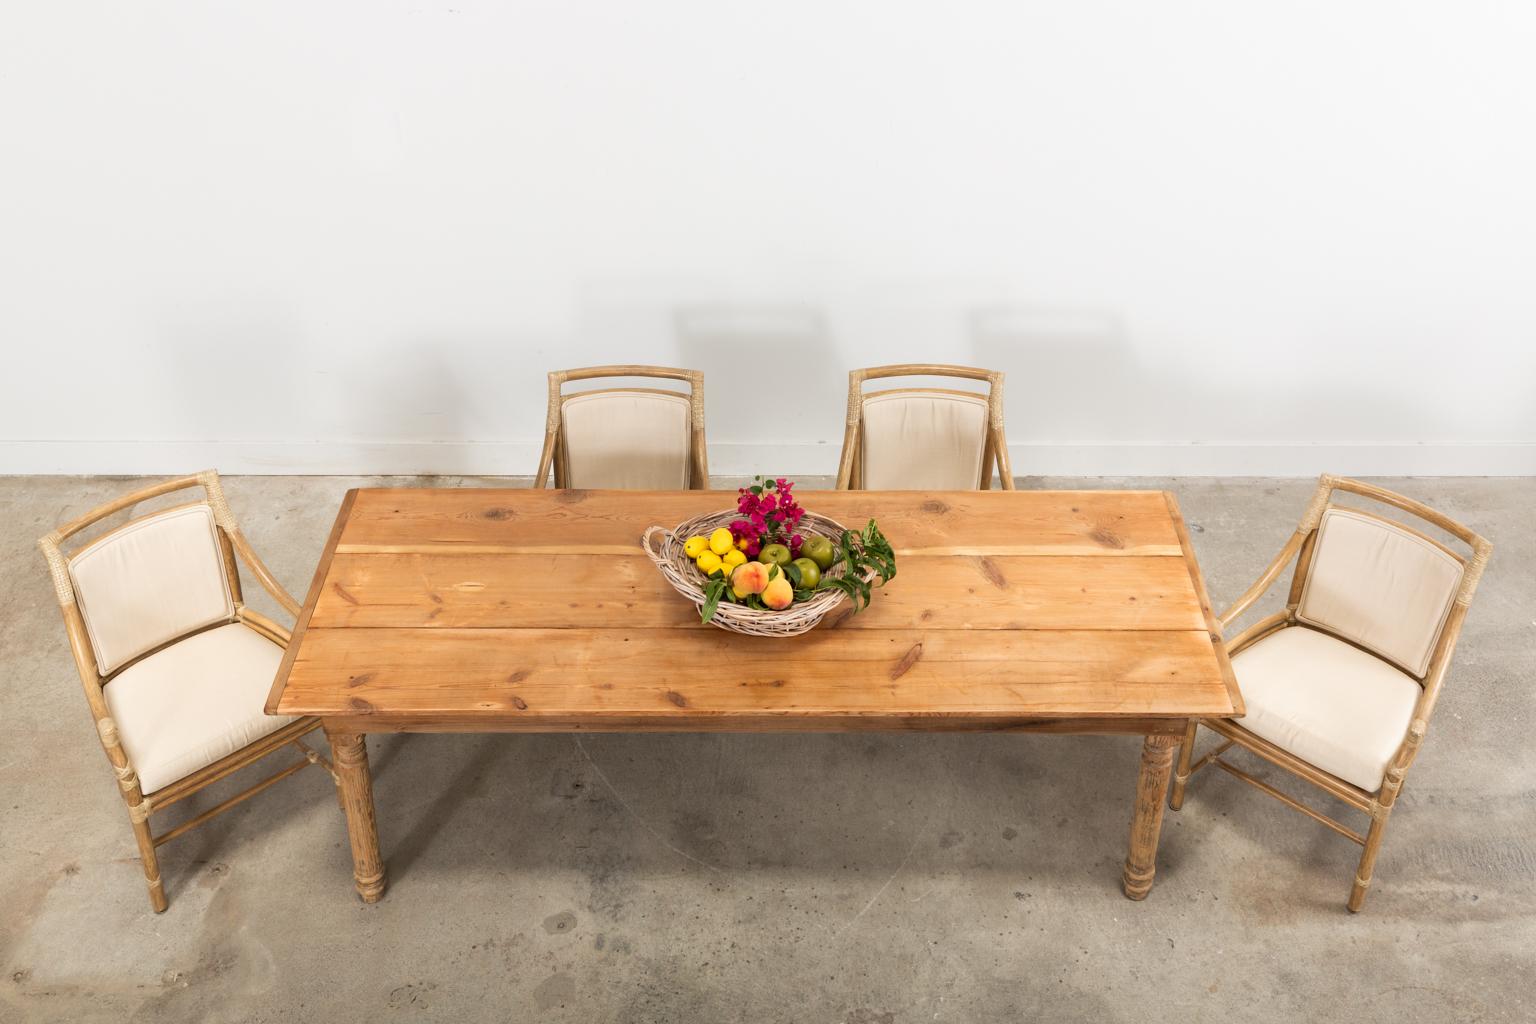 Charming American country farmhouse dining table crafted from reclaimed pine with a beautifully aged patina. The top is made from three wide planks having breadboard ends and a natural finish. The base is supported by thick, turned legs that are